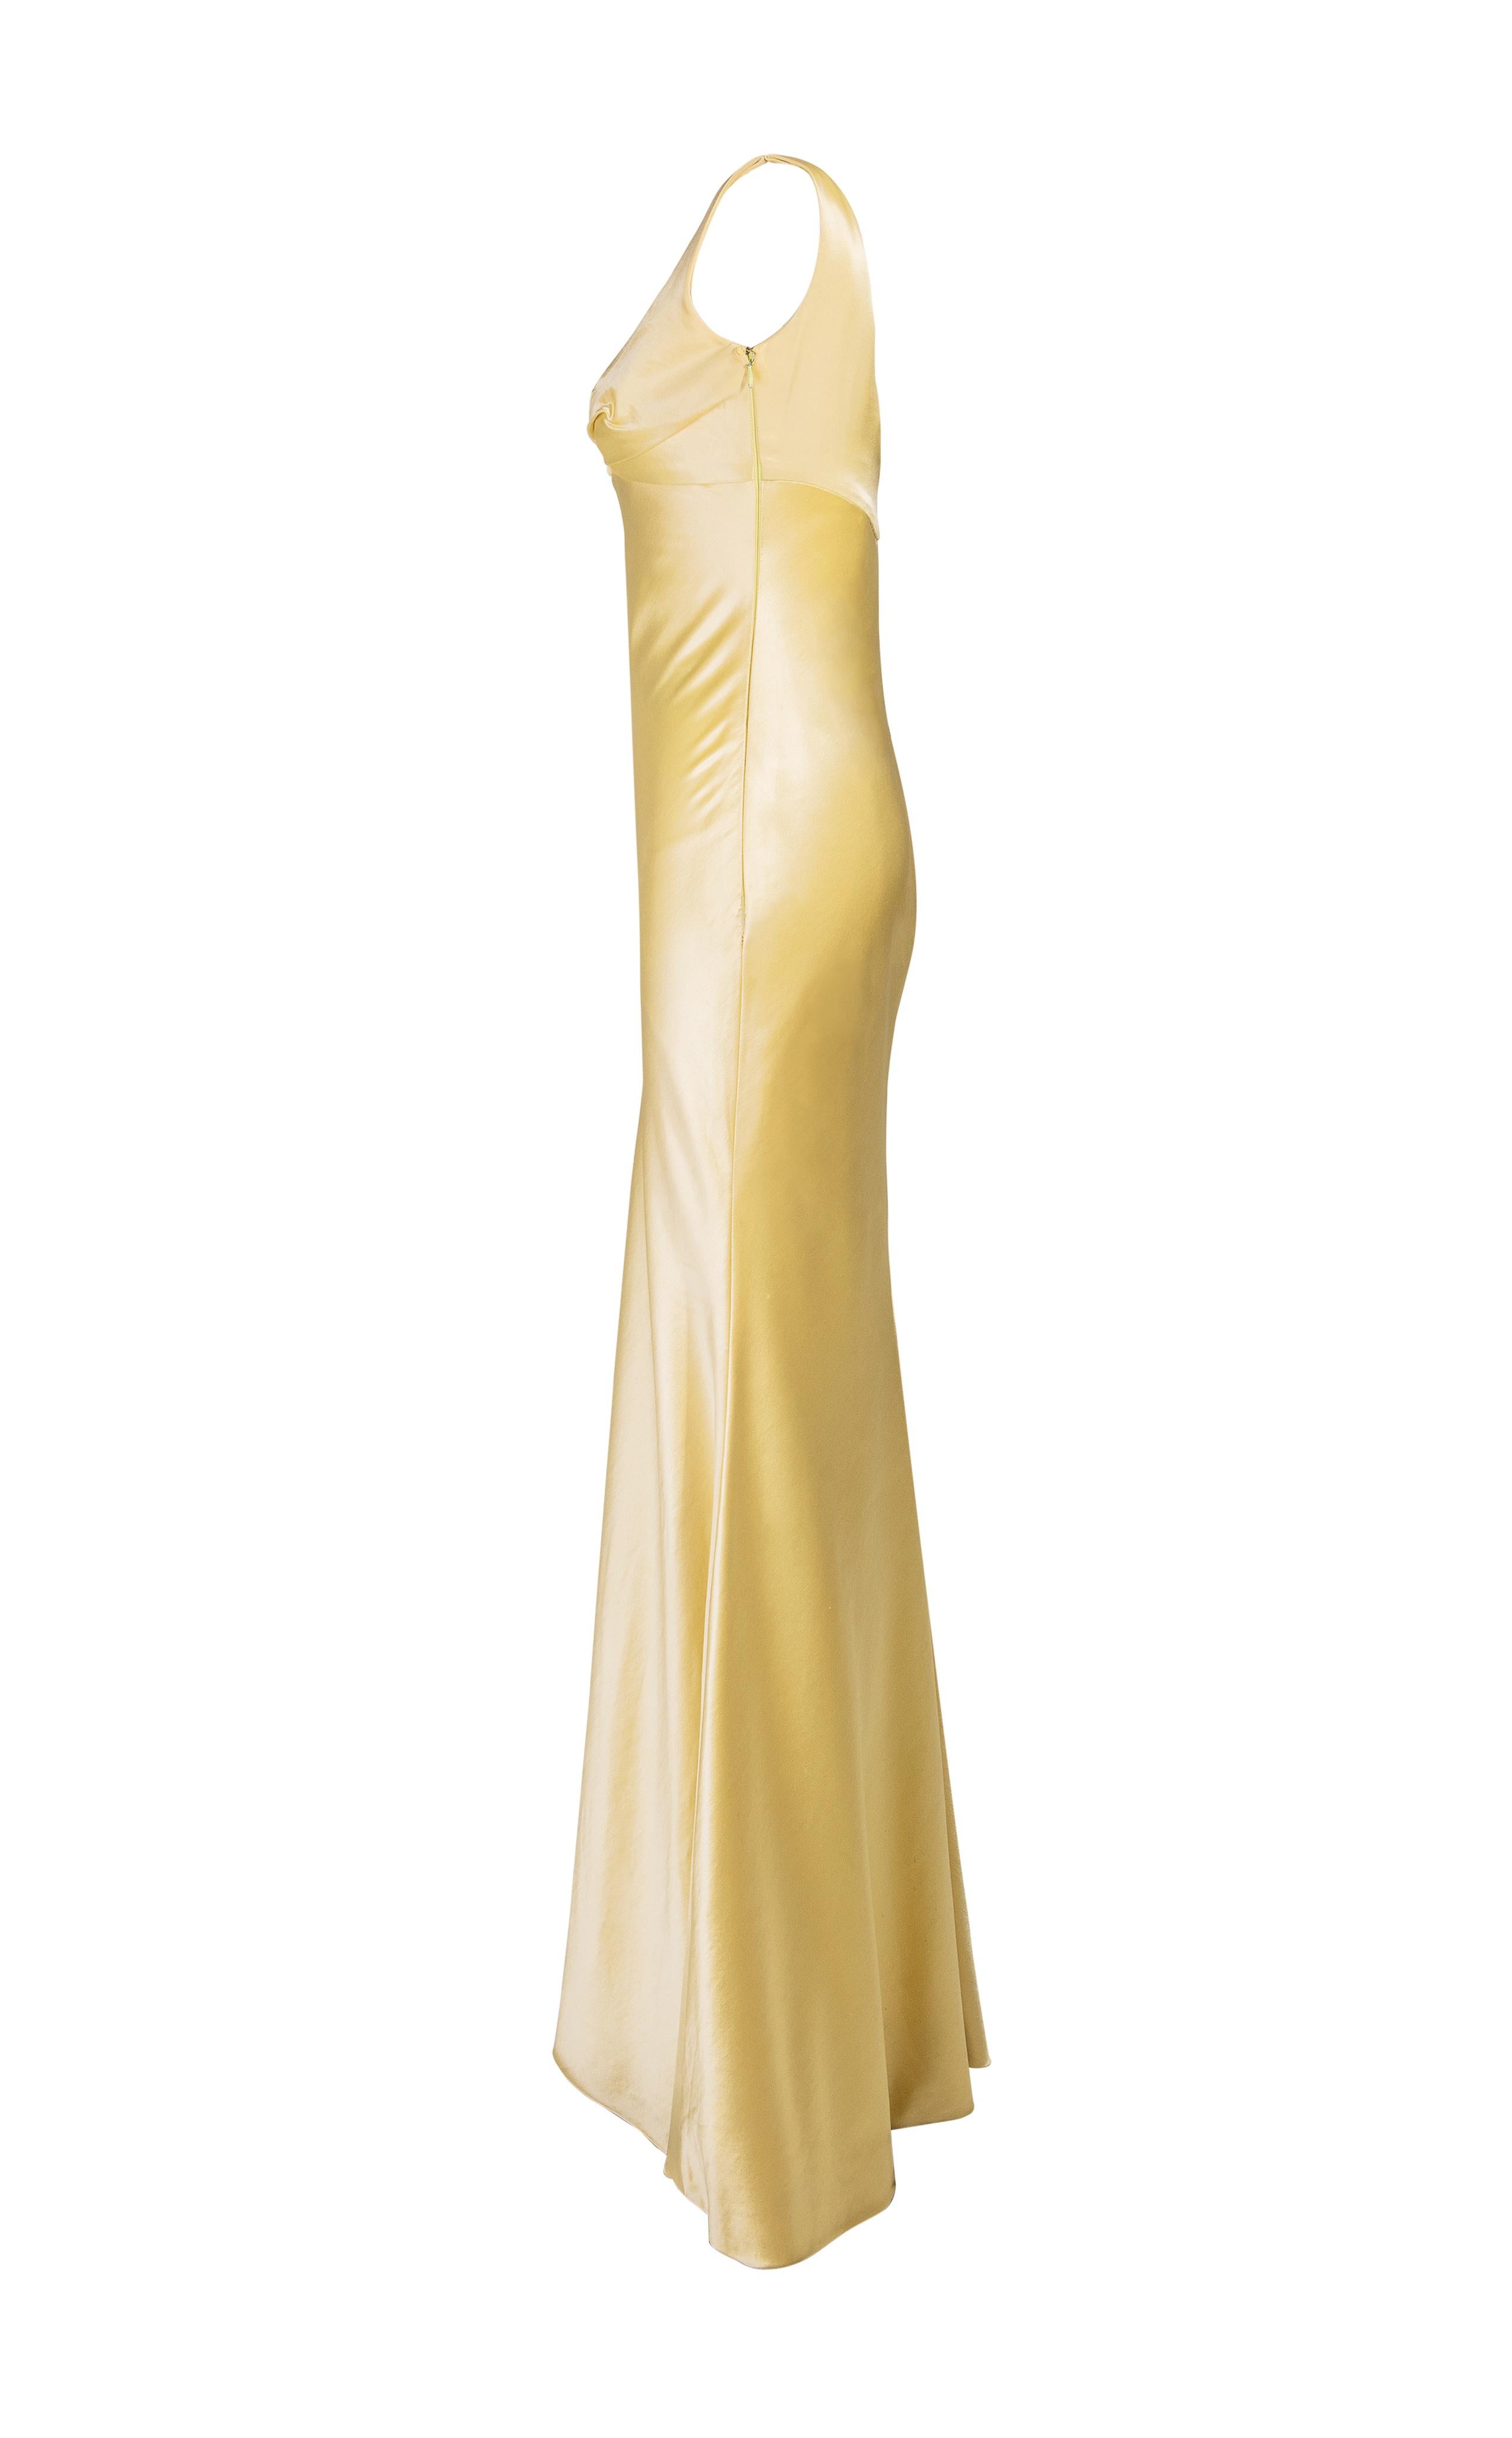 A/W 1995 Gianni Versace Yellow Silk Satin Gown with Twist Bust In Good Condition In North Hollywood, CA